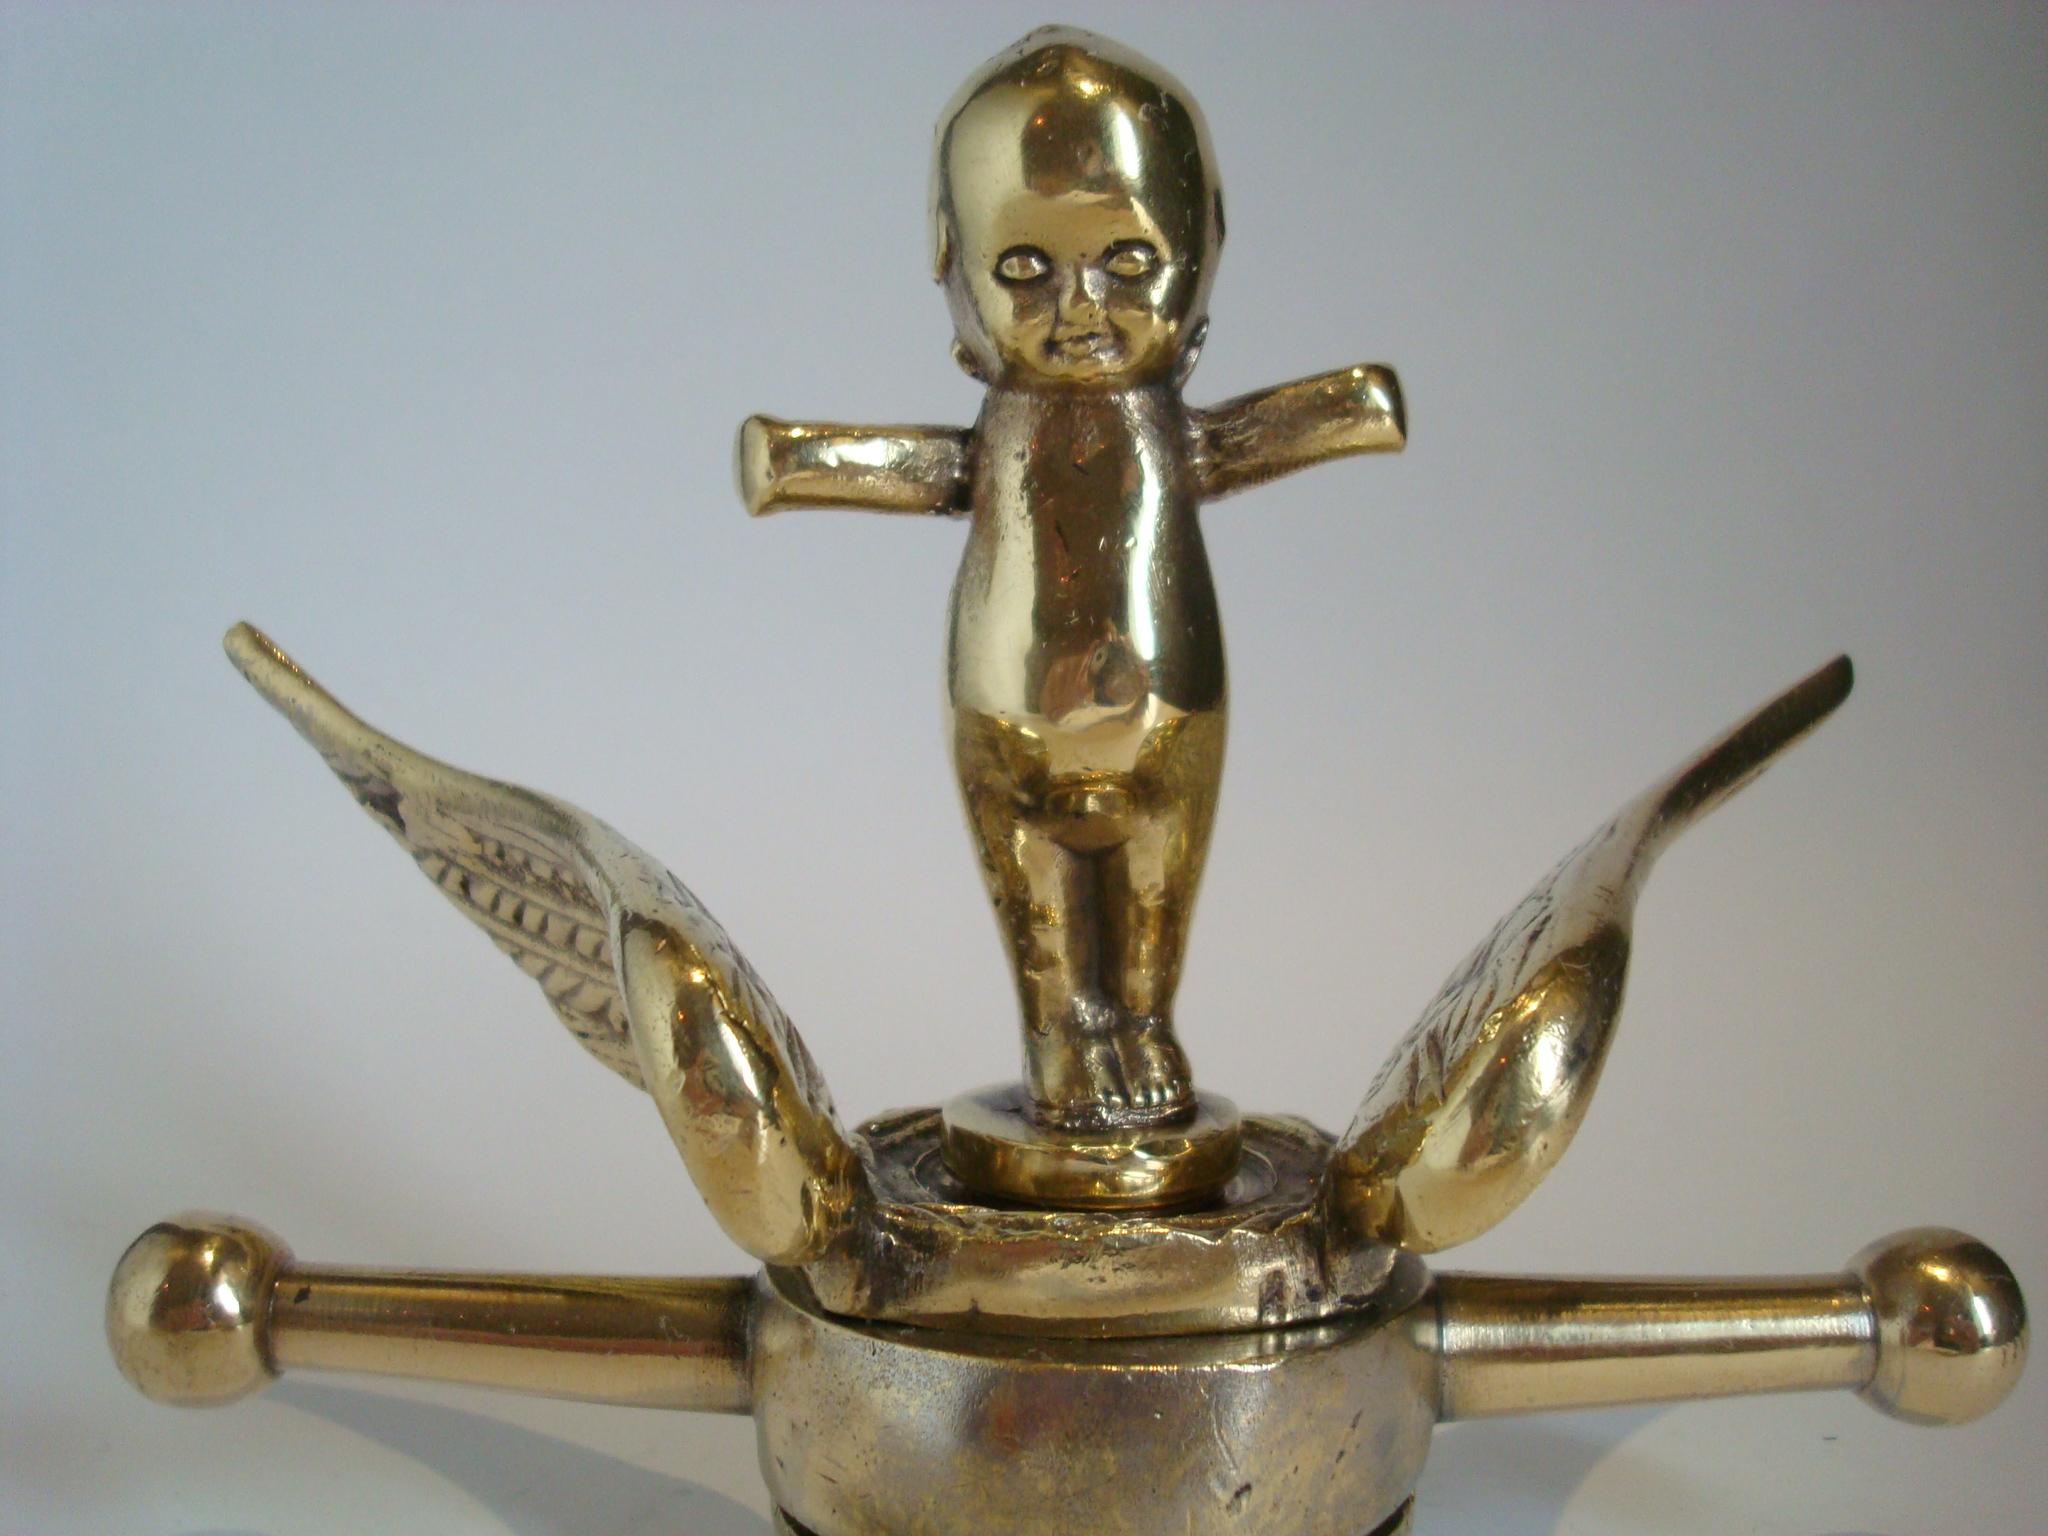 Old bronze kewpie doll car Mascot / hood ornament. 1912-1920´s.
Mounted over a wings radiator cap. Perfect gift for any Car Fan / Automobilia. Can be used as a paperweight.
Kewpie is a brand of dolls and figurines that were conceived as comic